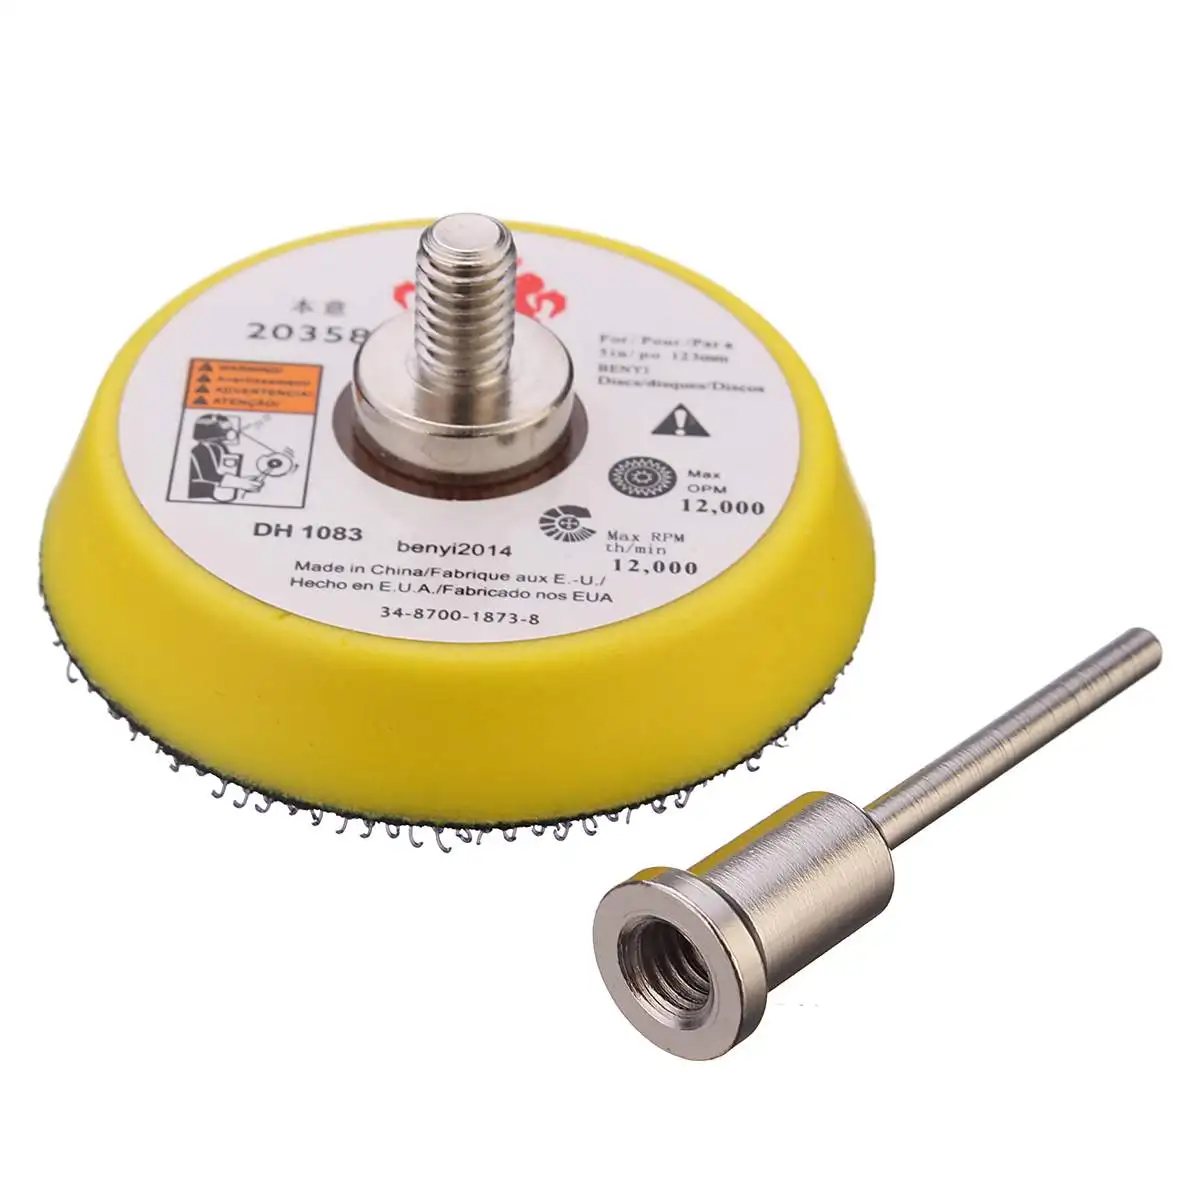 

2 Inch Polishing Pad Sanding Buffing Plate Disc Power Tools for Car Polisher Polishing Machine Accessories with 3mm Shank